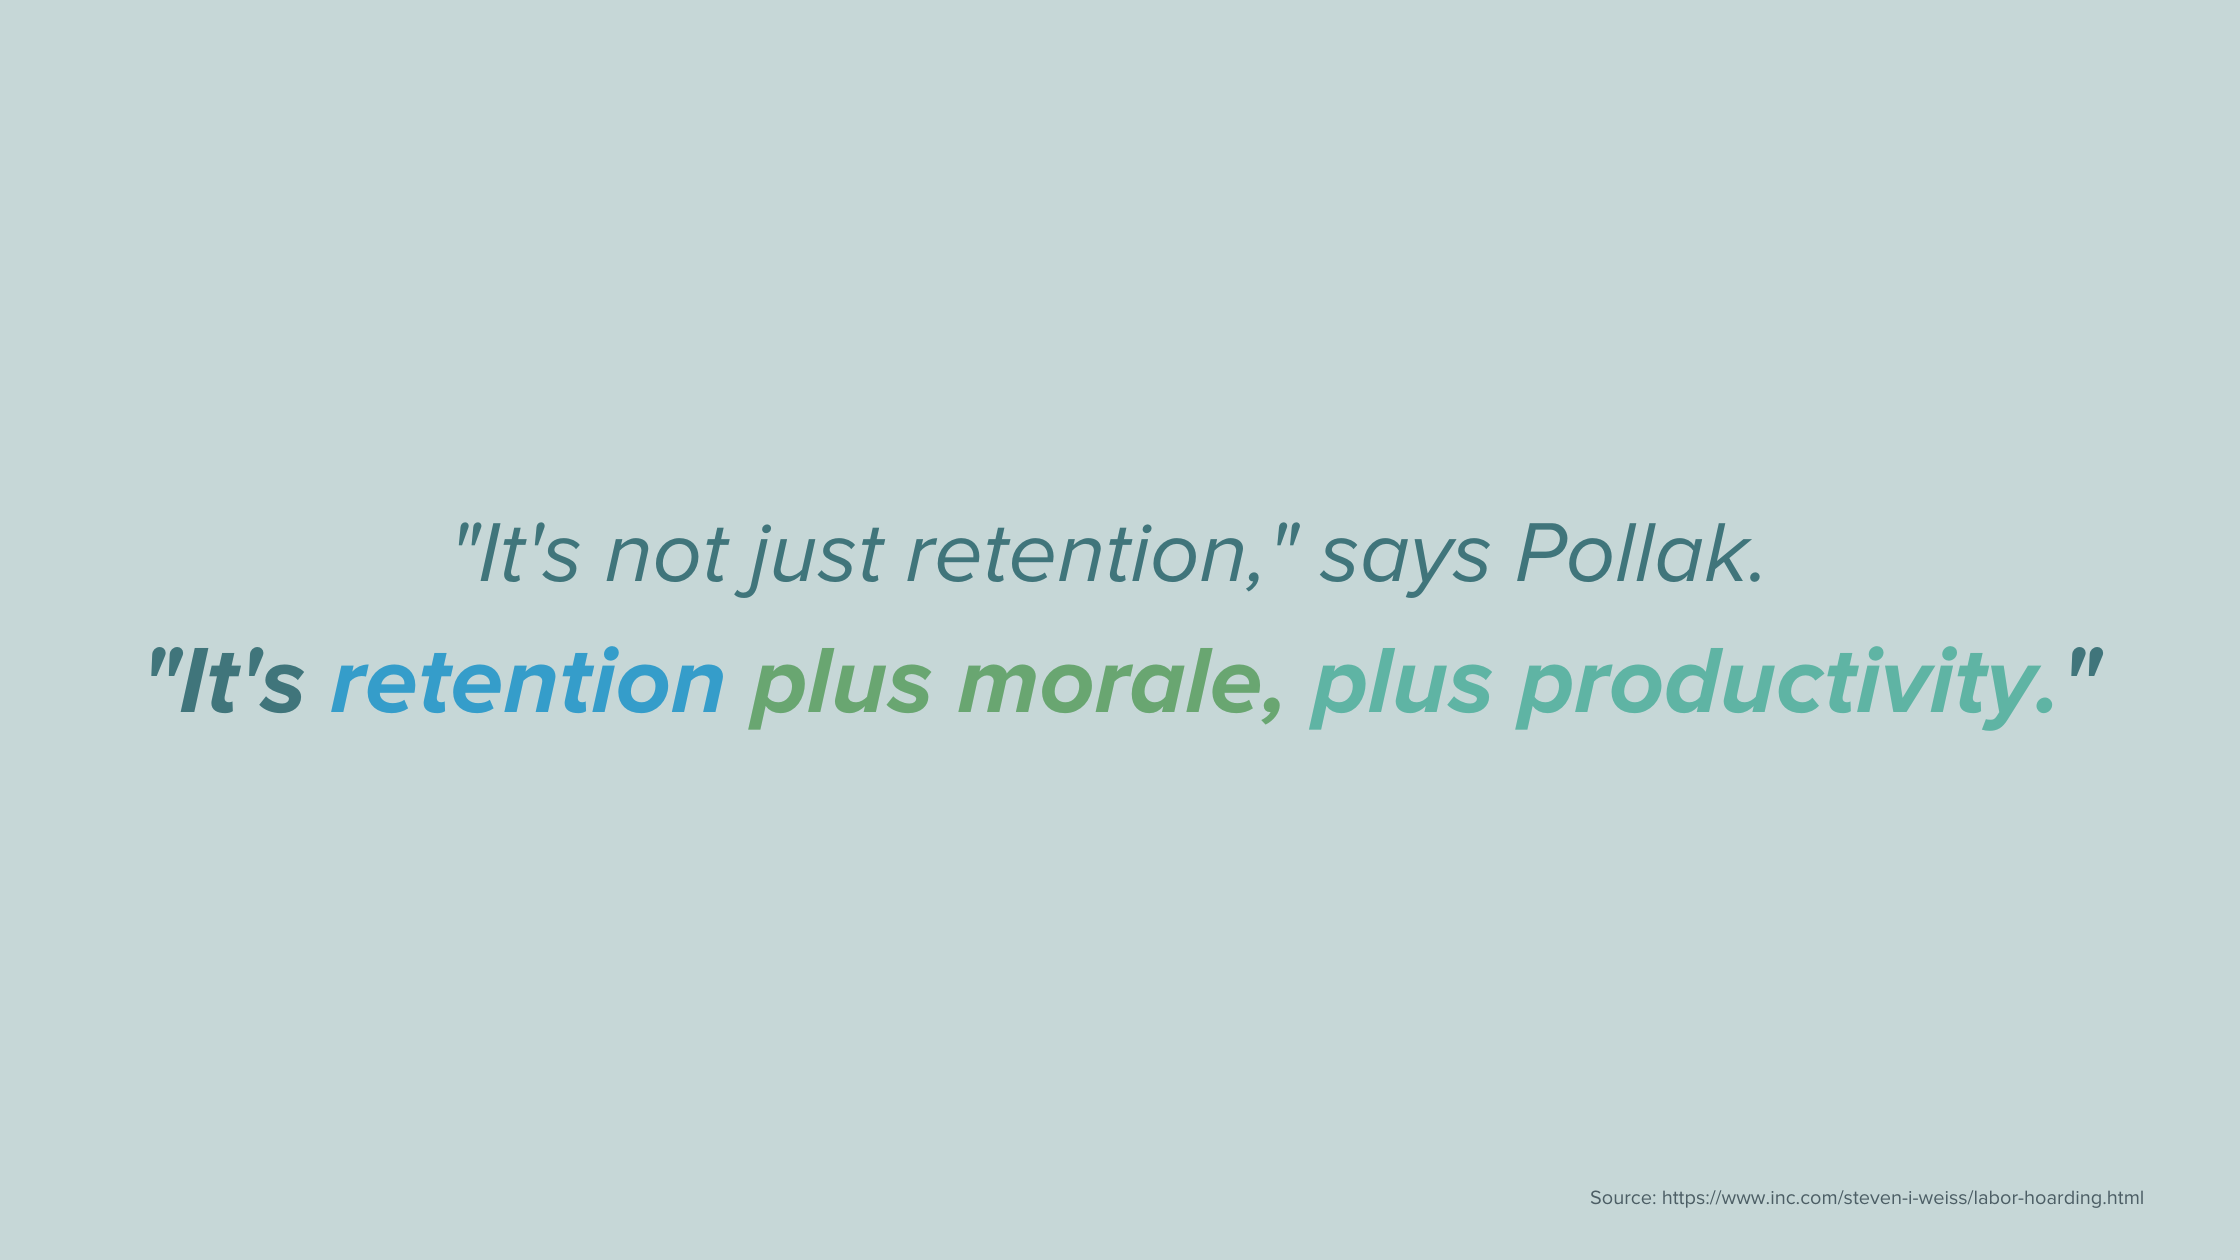 A quote on a grey background says ""It's not just retention," says Pollak.  "It's retention plus morale, plus productivity."